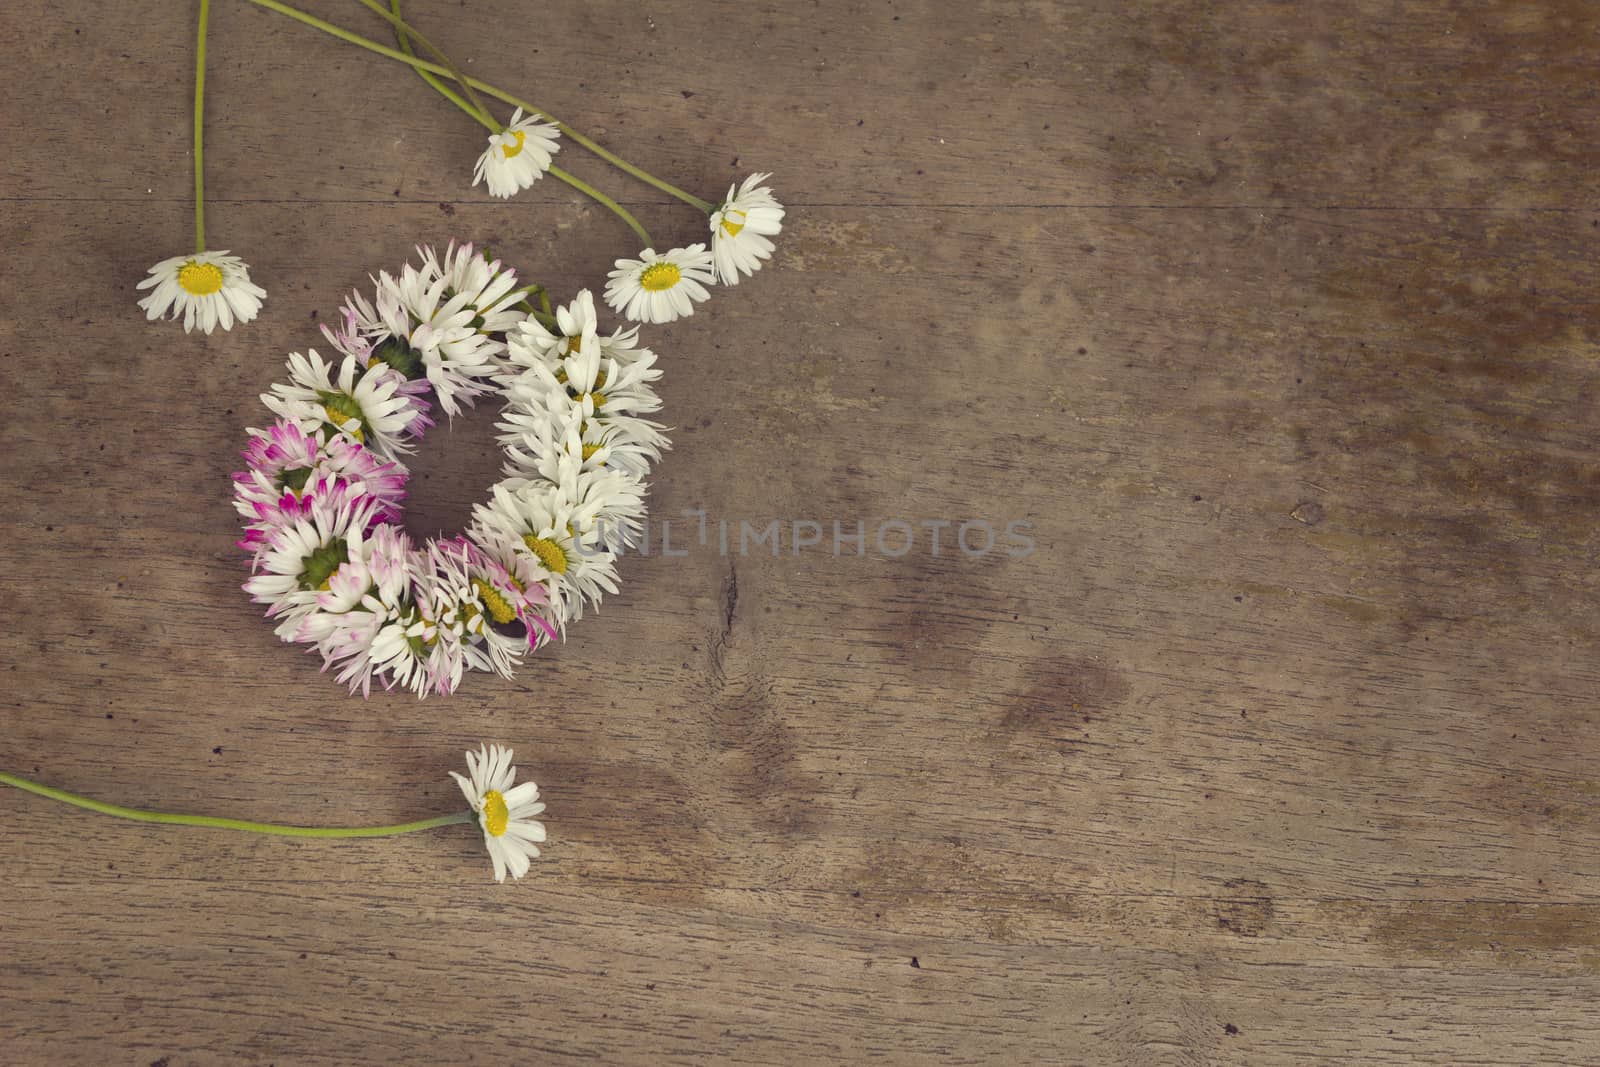 Wreath of daisies on an old wooden table